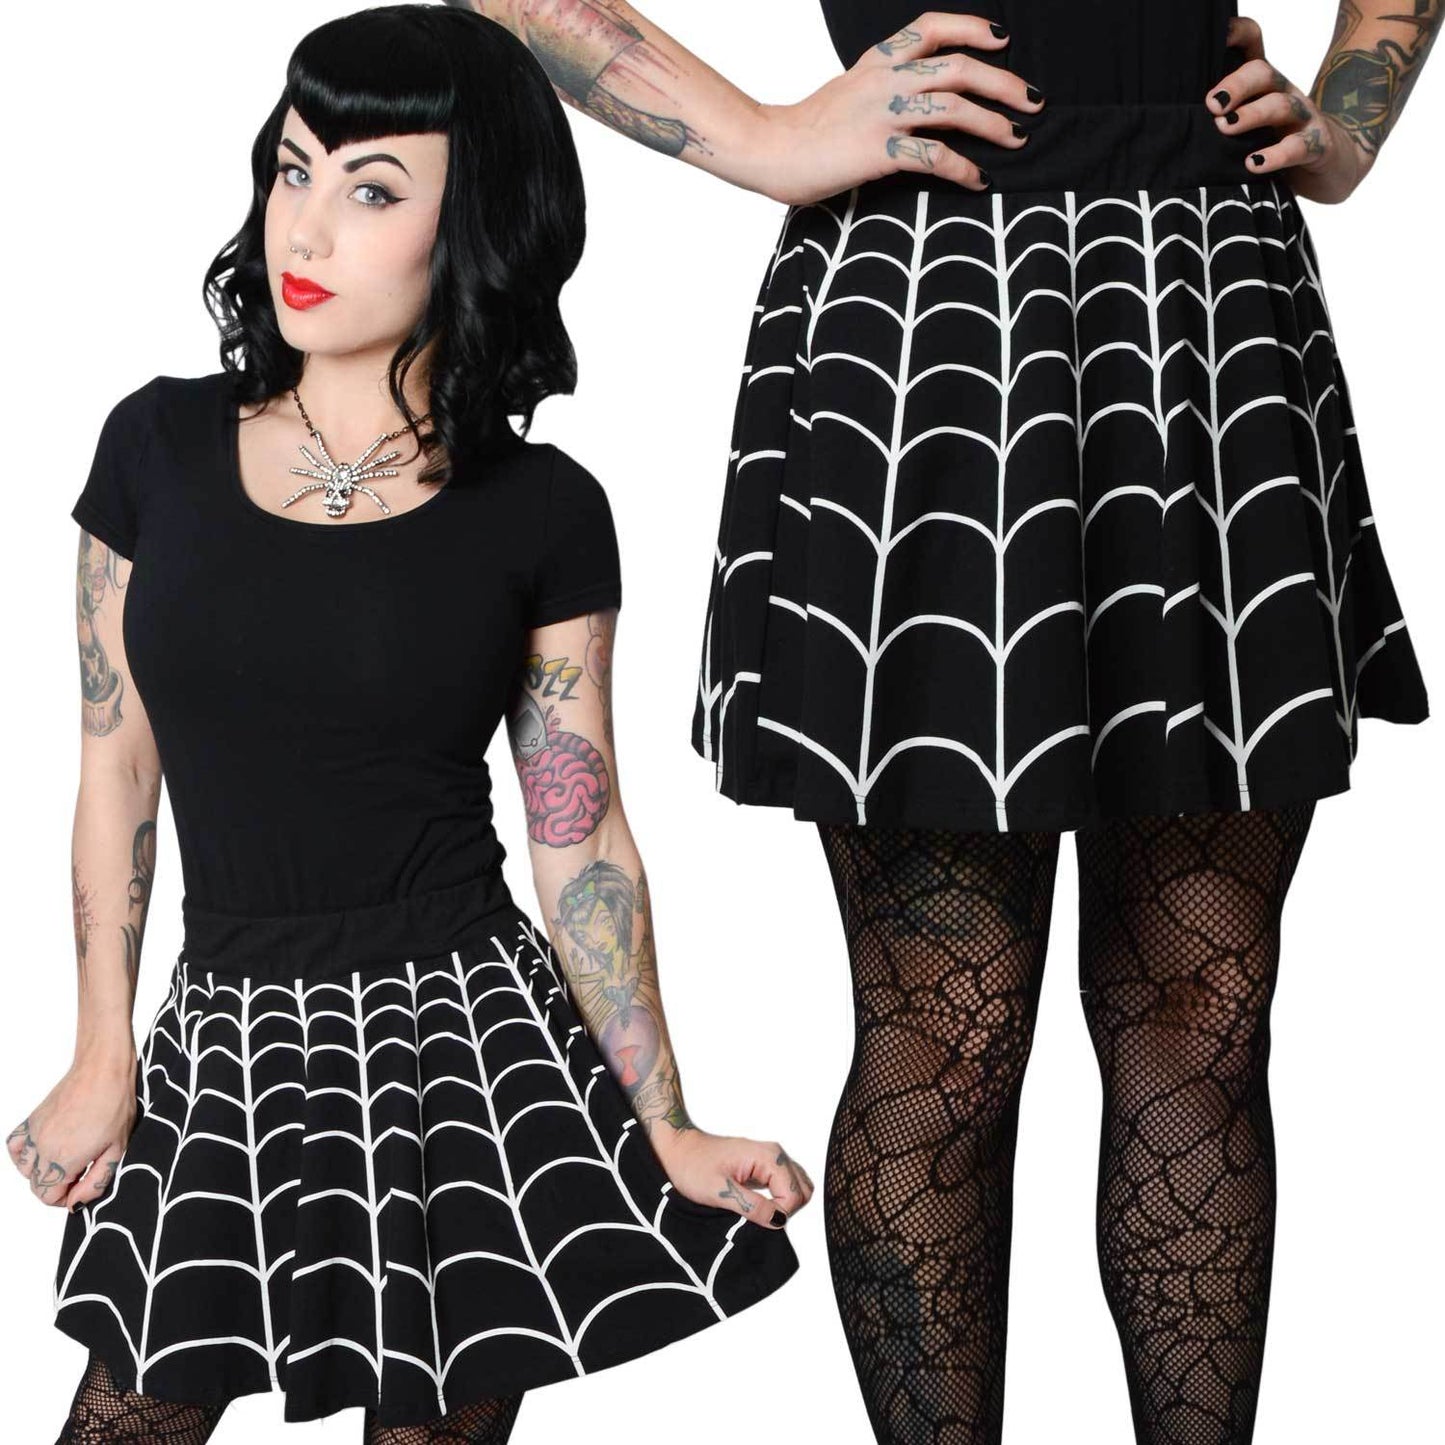 The Webs we Weave Skater Skirt (Plus Available)